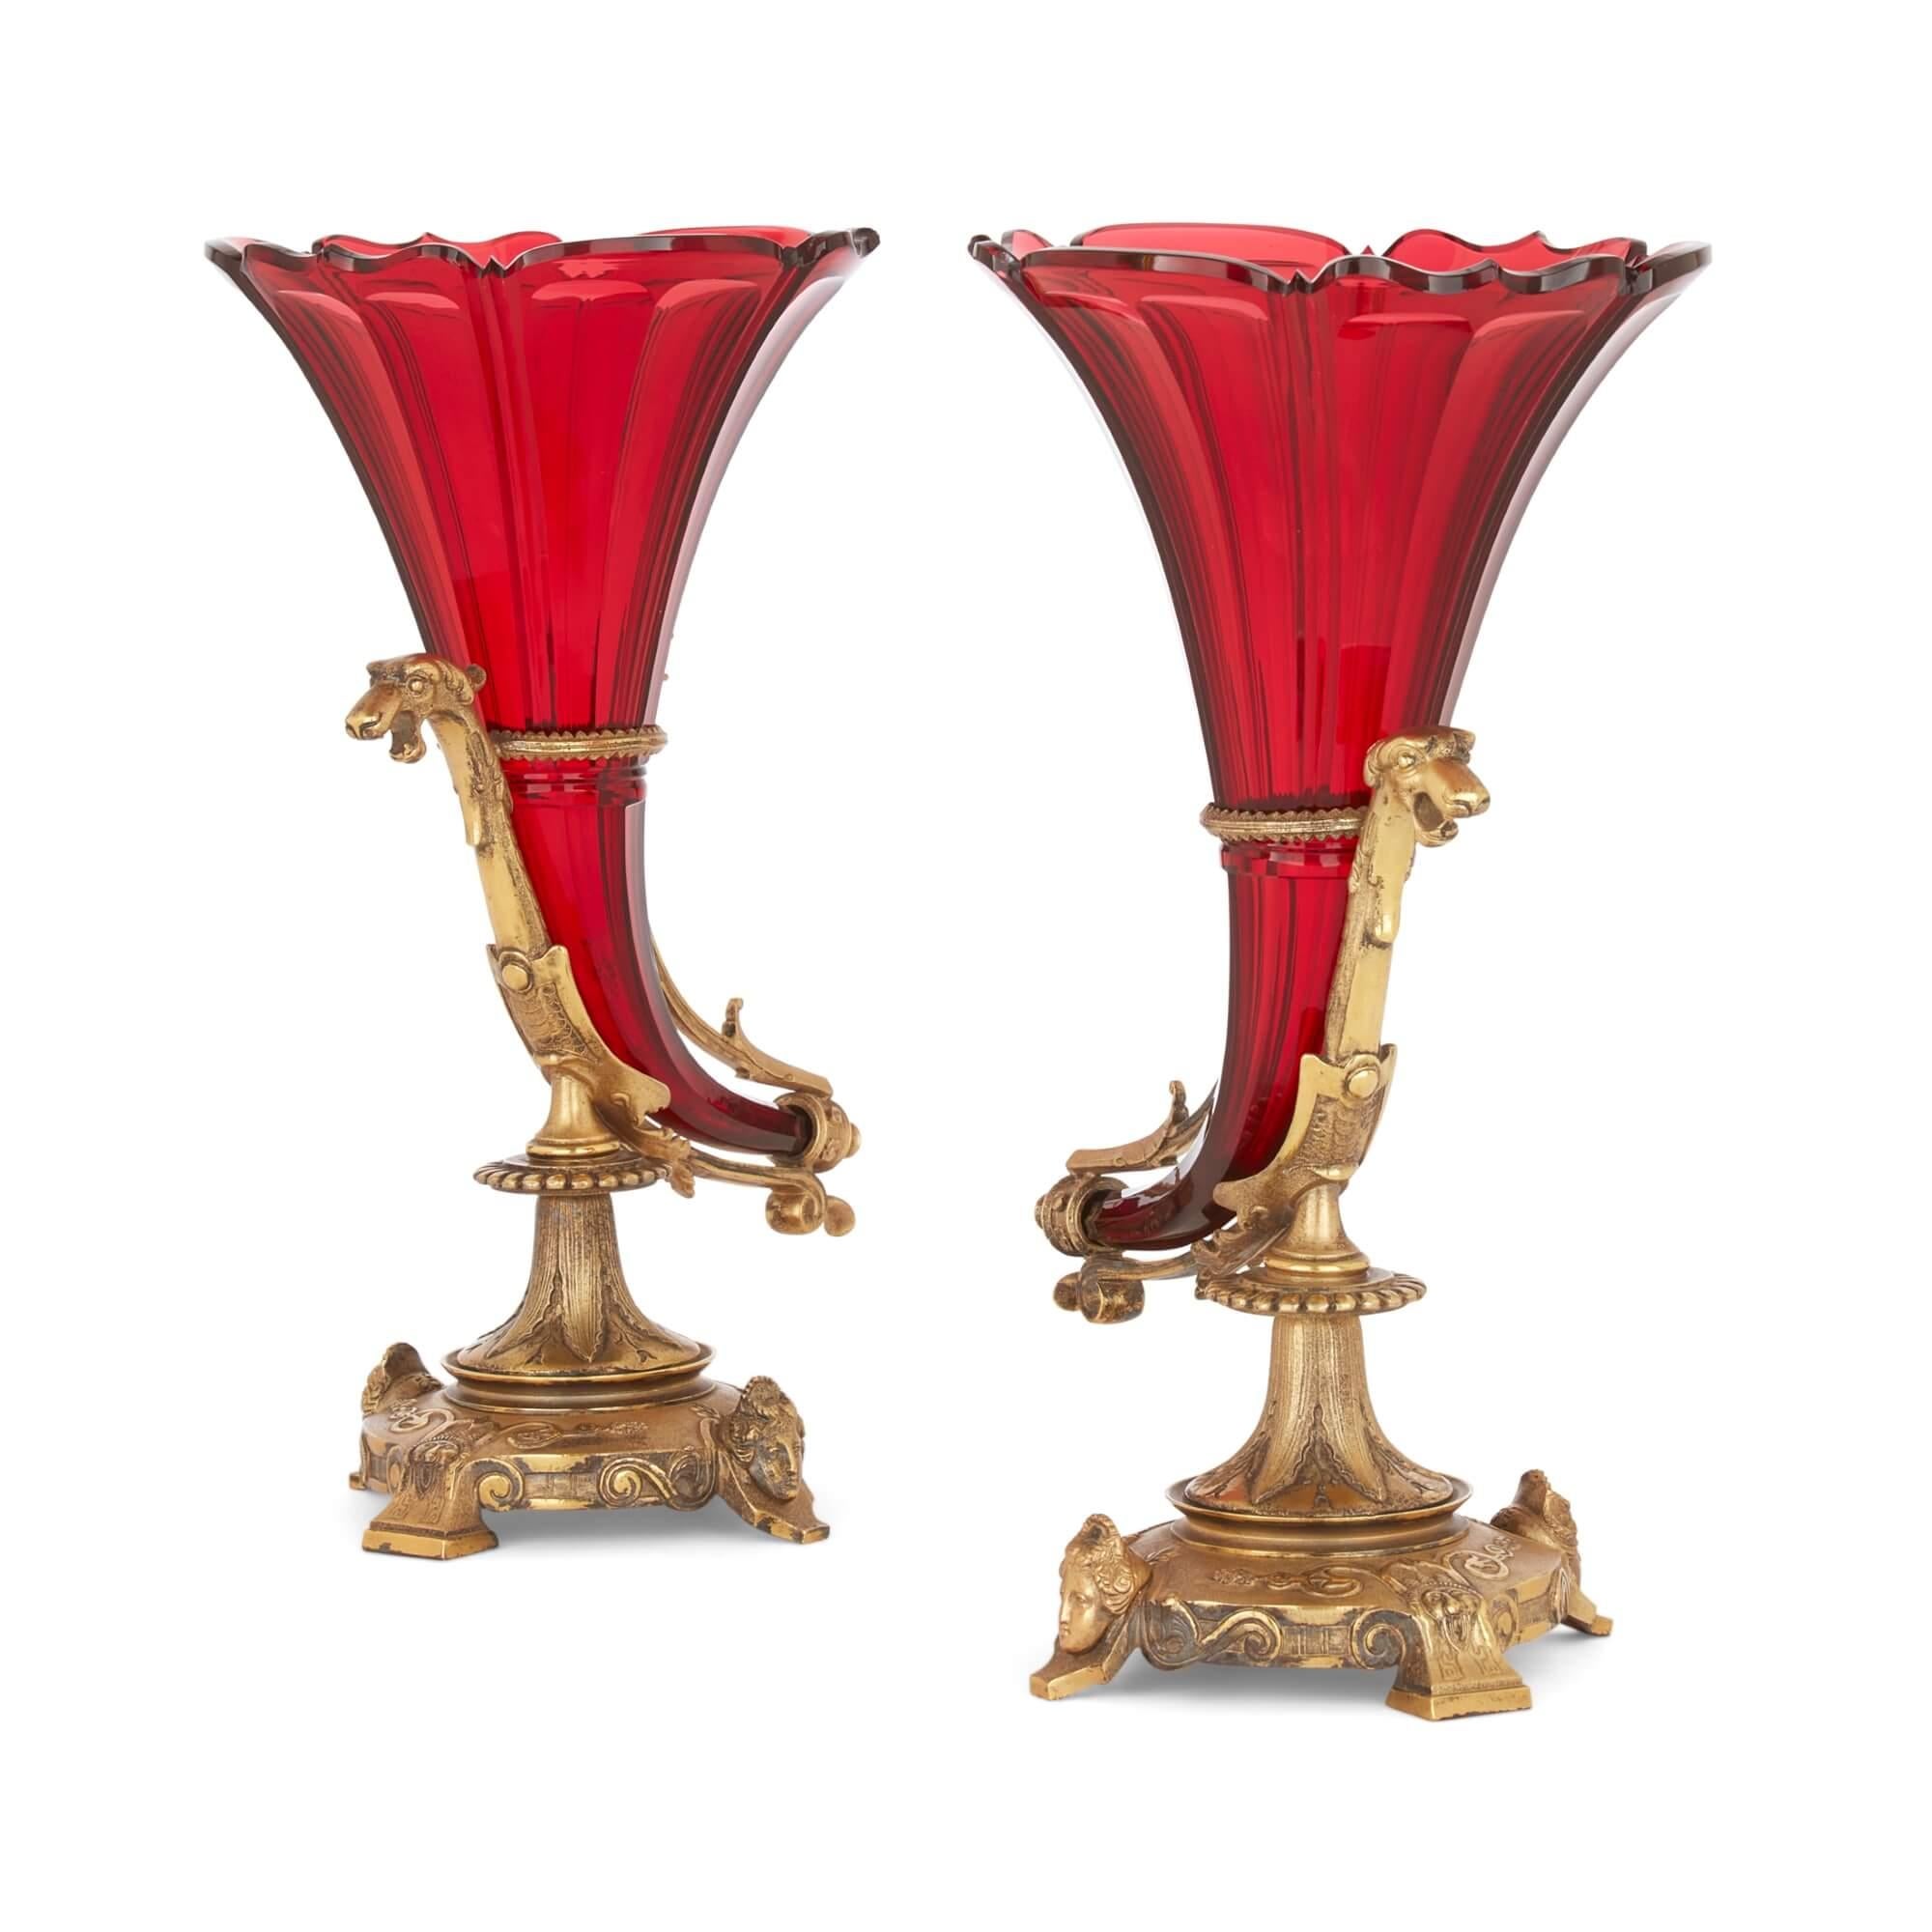 French Large Antique Ormolu Mounted Red Glass Centrepiece Suite by Baccarat